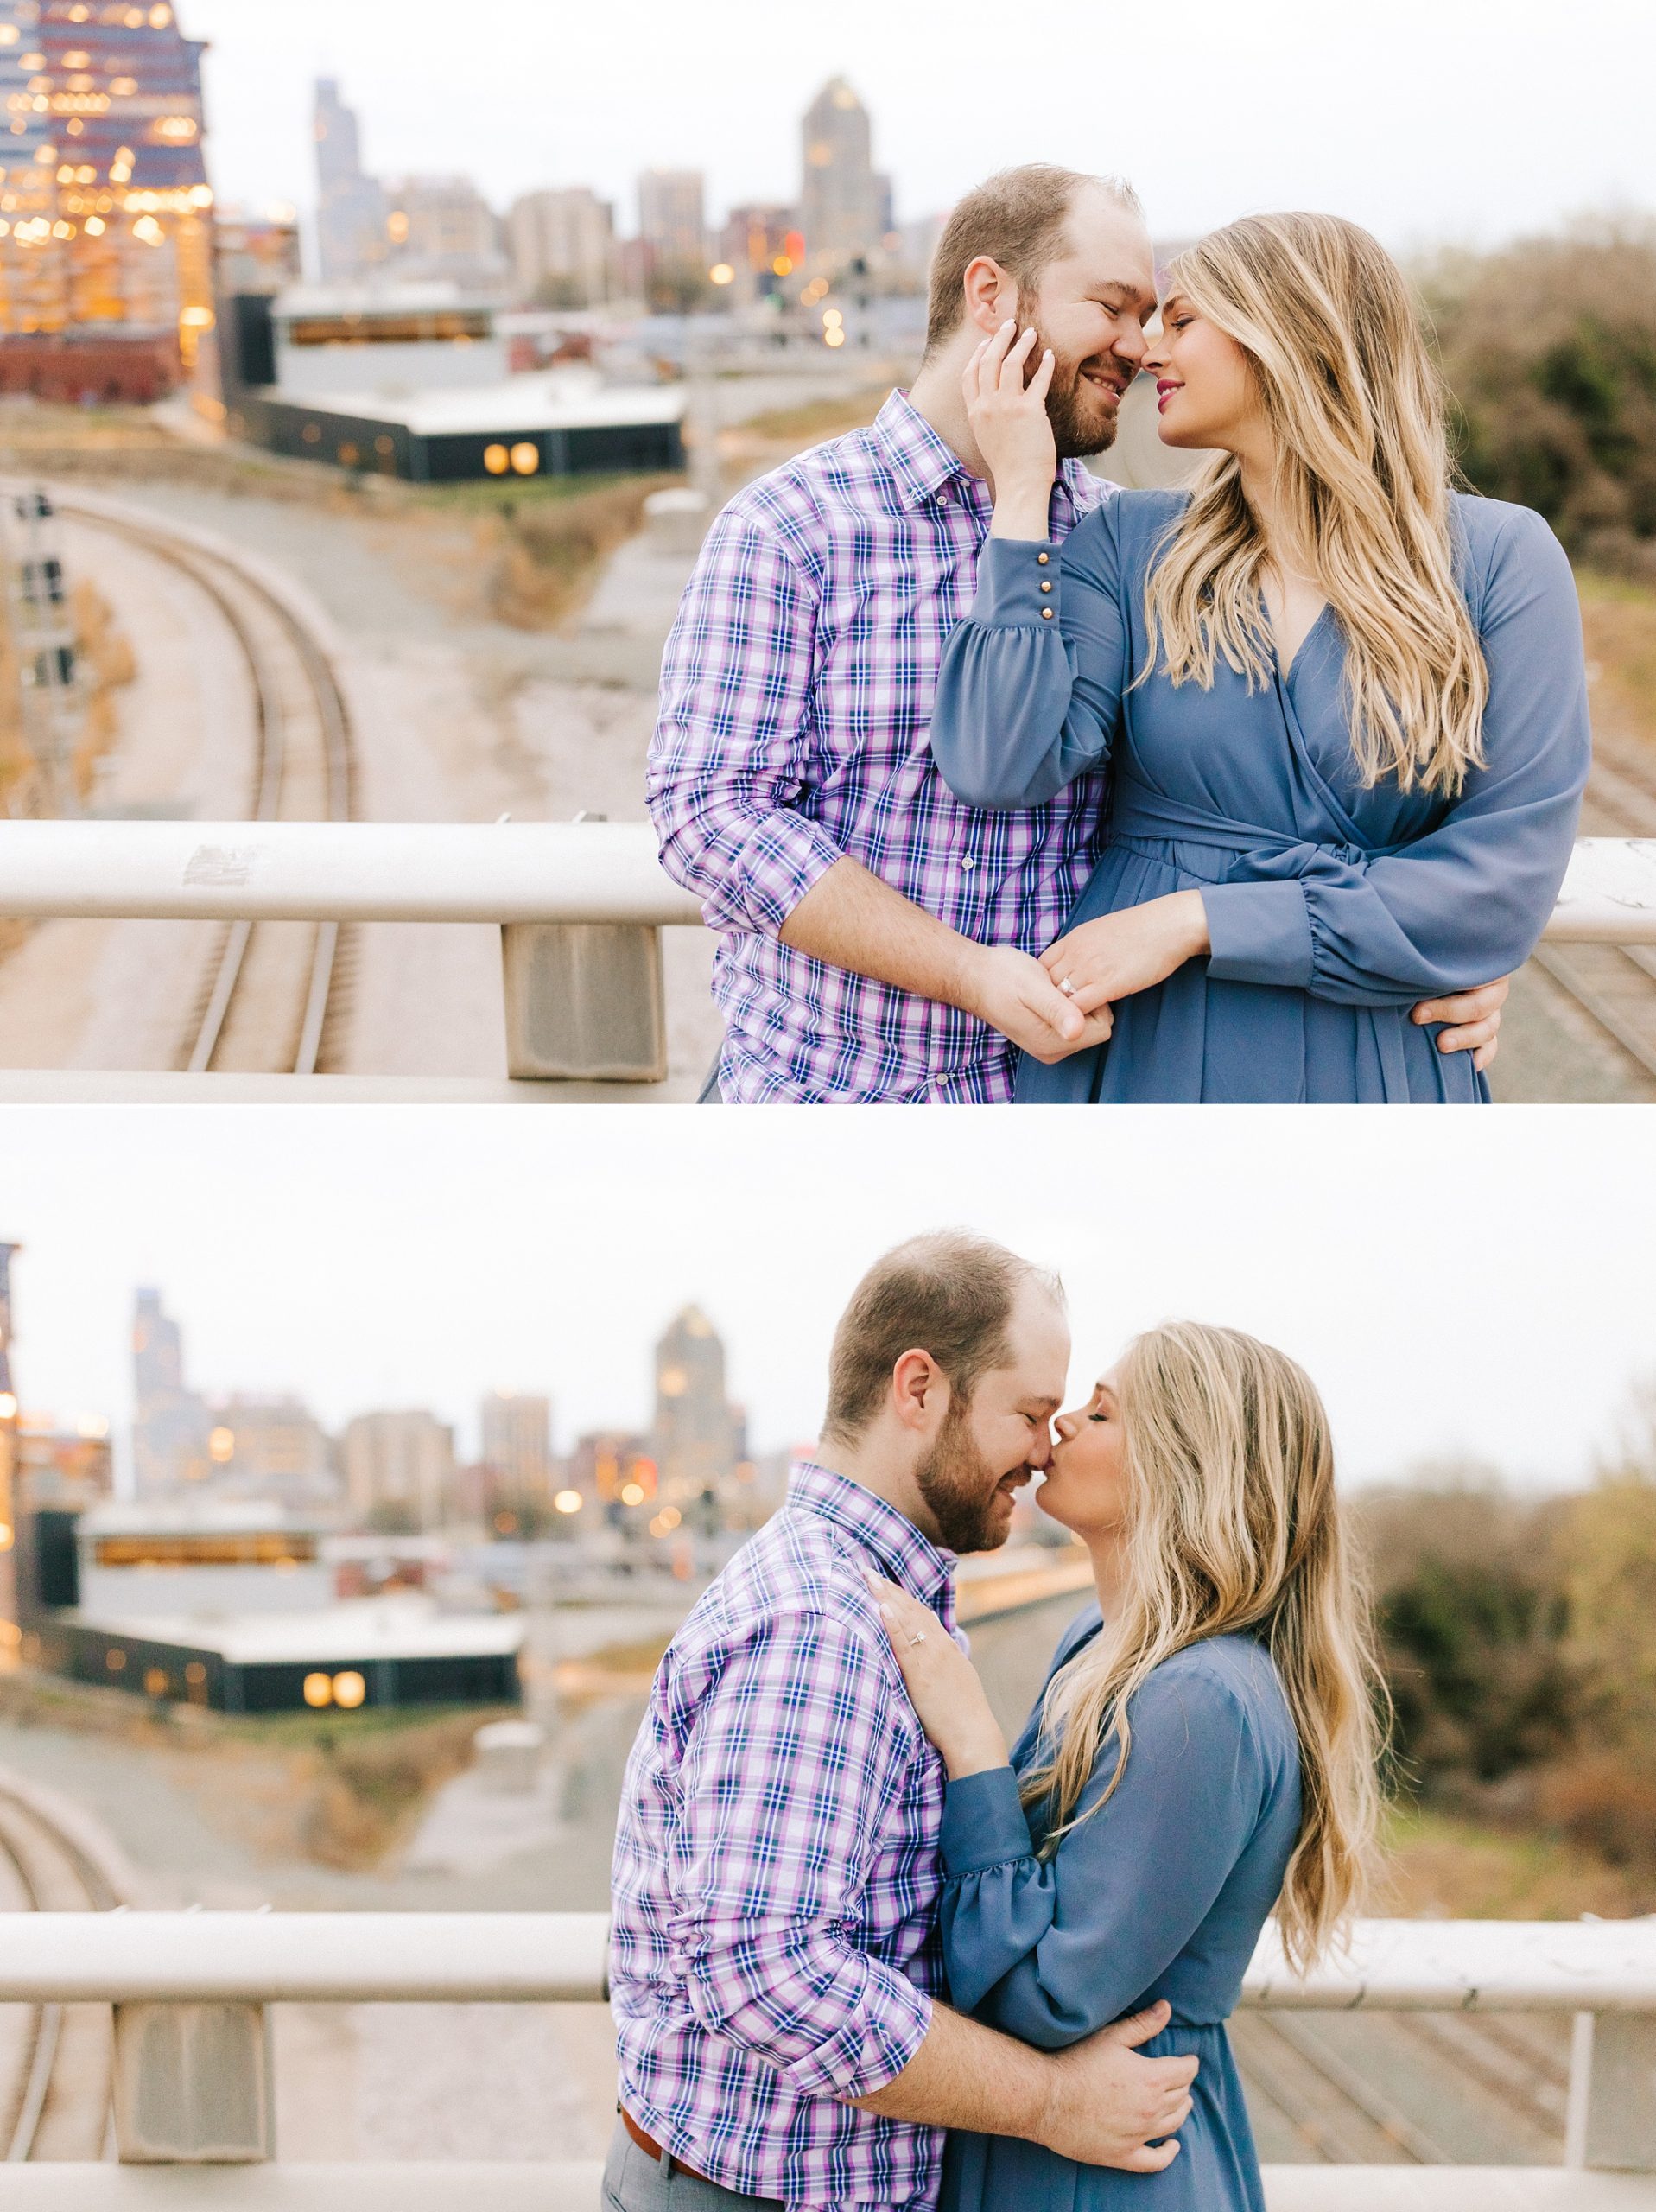 Downtown Raleigh engagement photos on parking garage roof